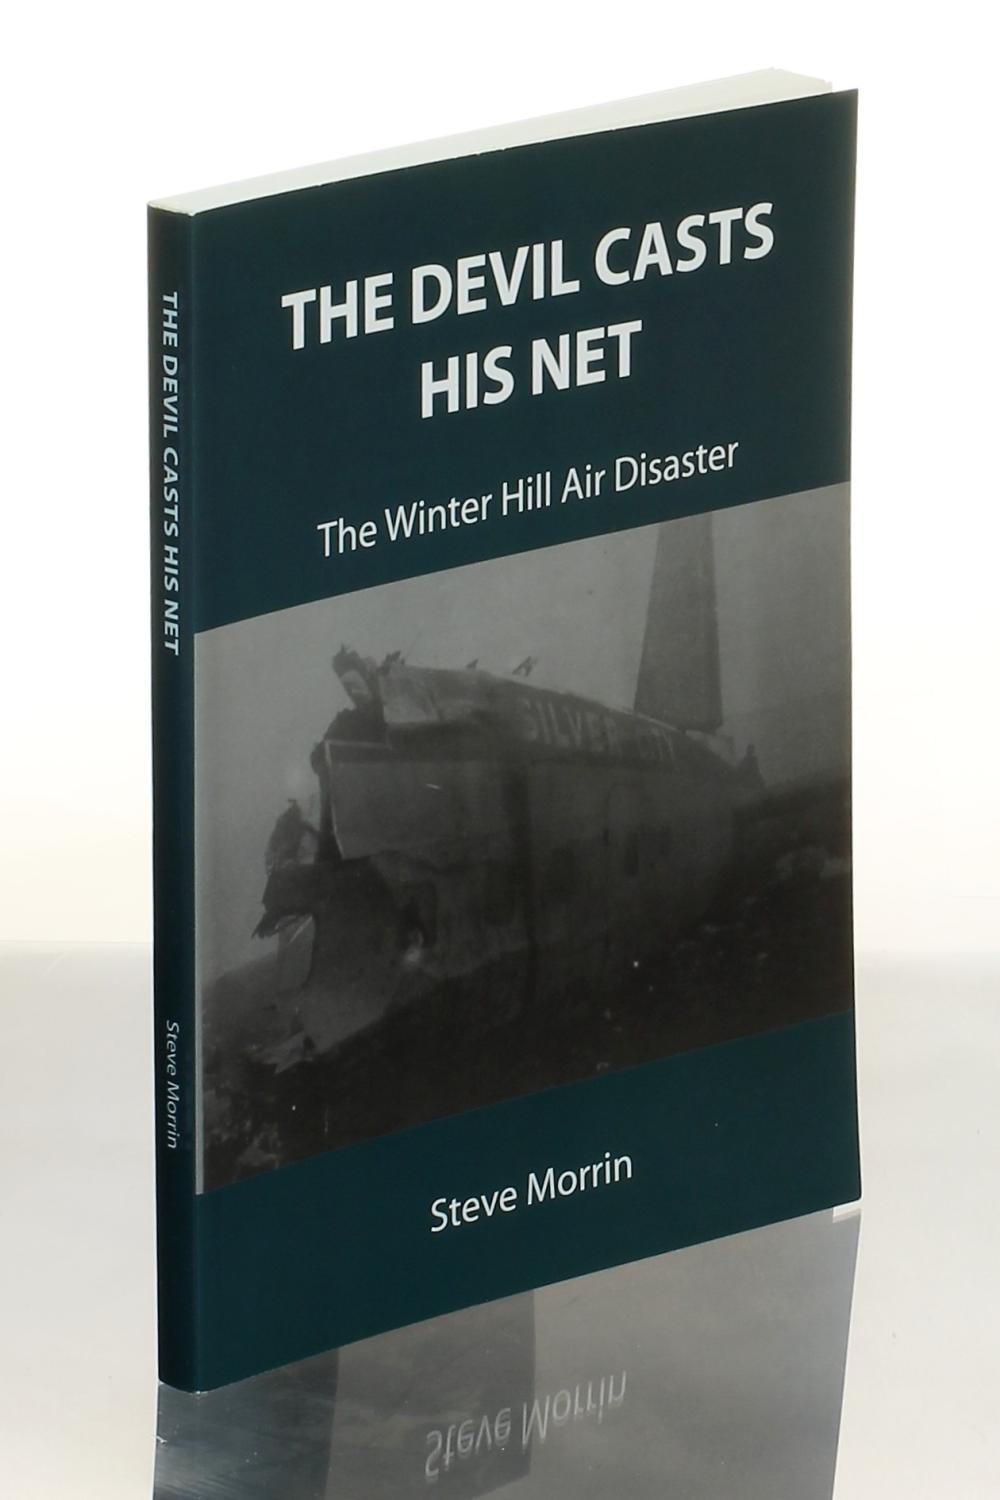 The Devil Casts His Net: The Winter Hill Air Disaster